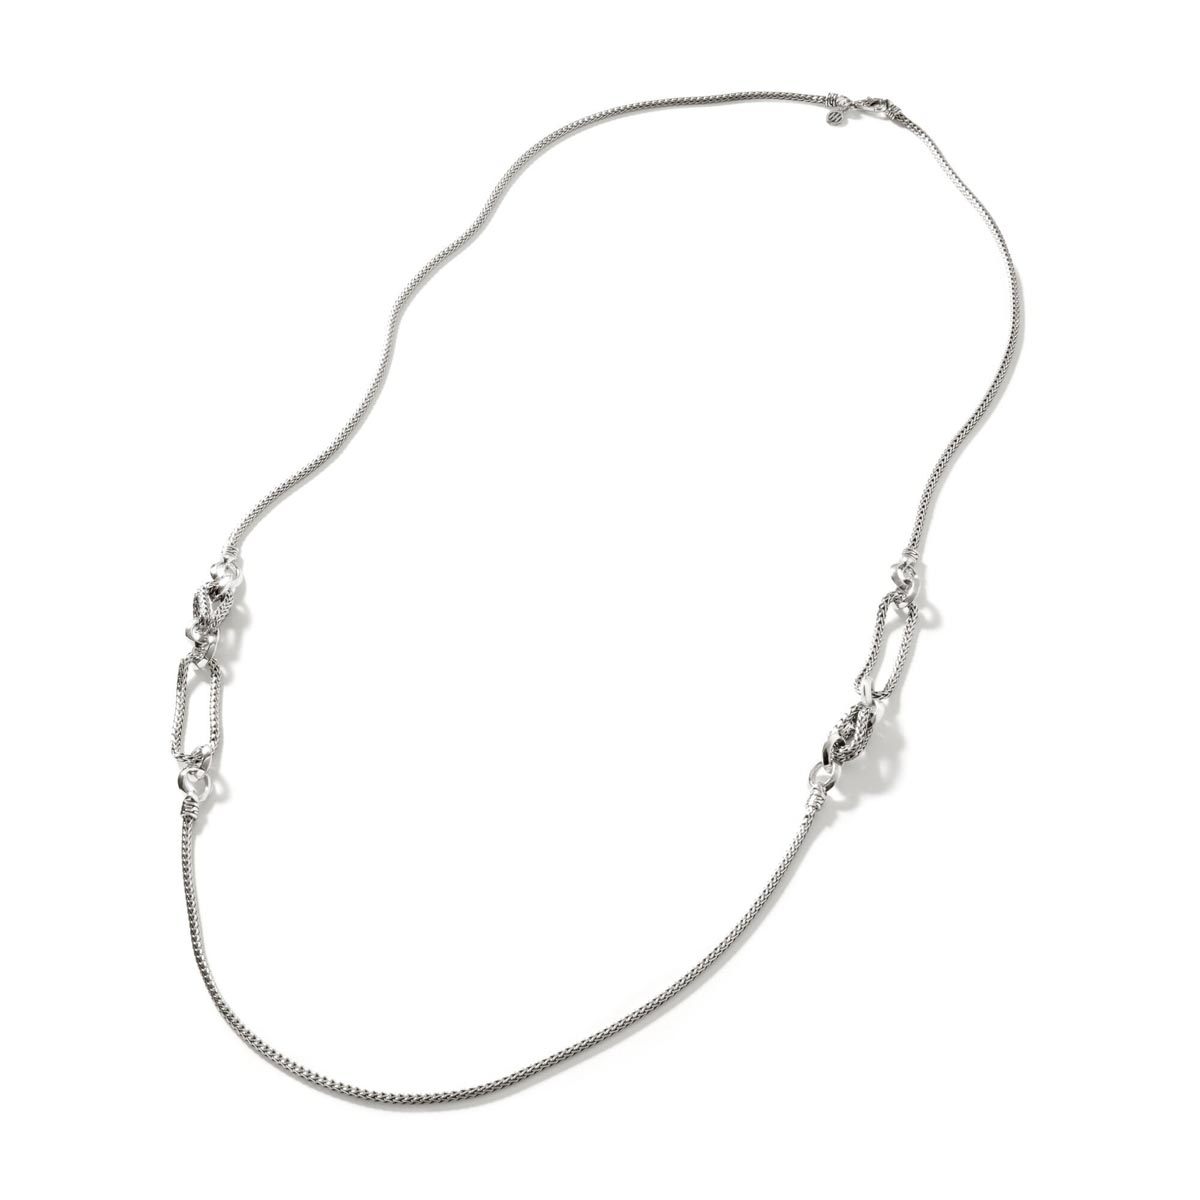 John Hardy Classic Chain Collection Asli Sautoir Necklace in Sterling Silver